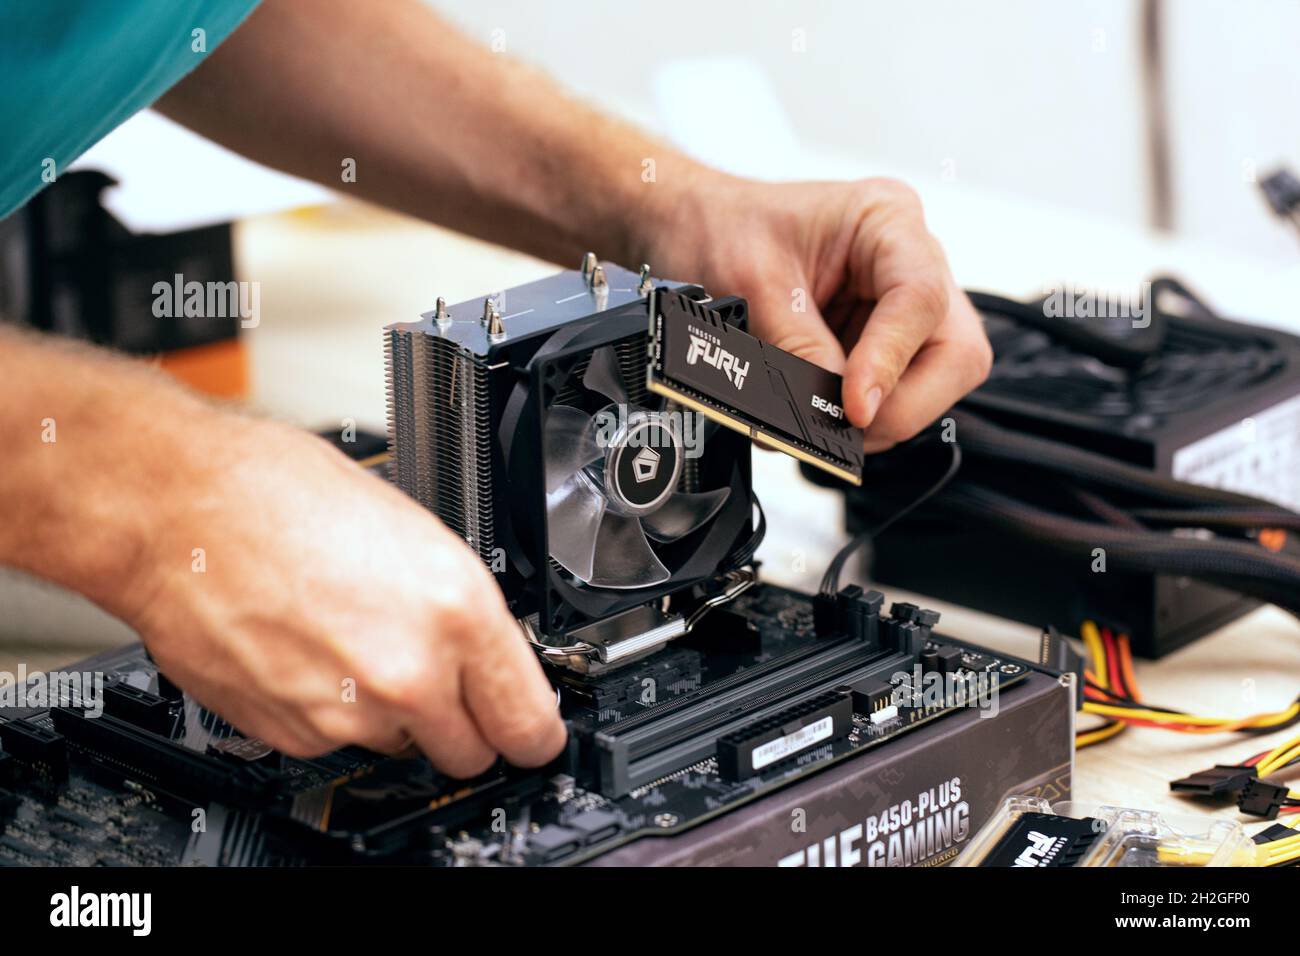 Cropped image of man installing Fury Beast random access memory DDR4 stick on motherboard of professional PC for cryptocurrency mining. Russia, 17.08. Stock Photo